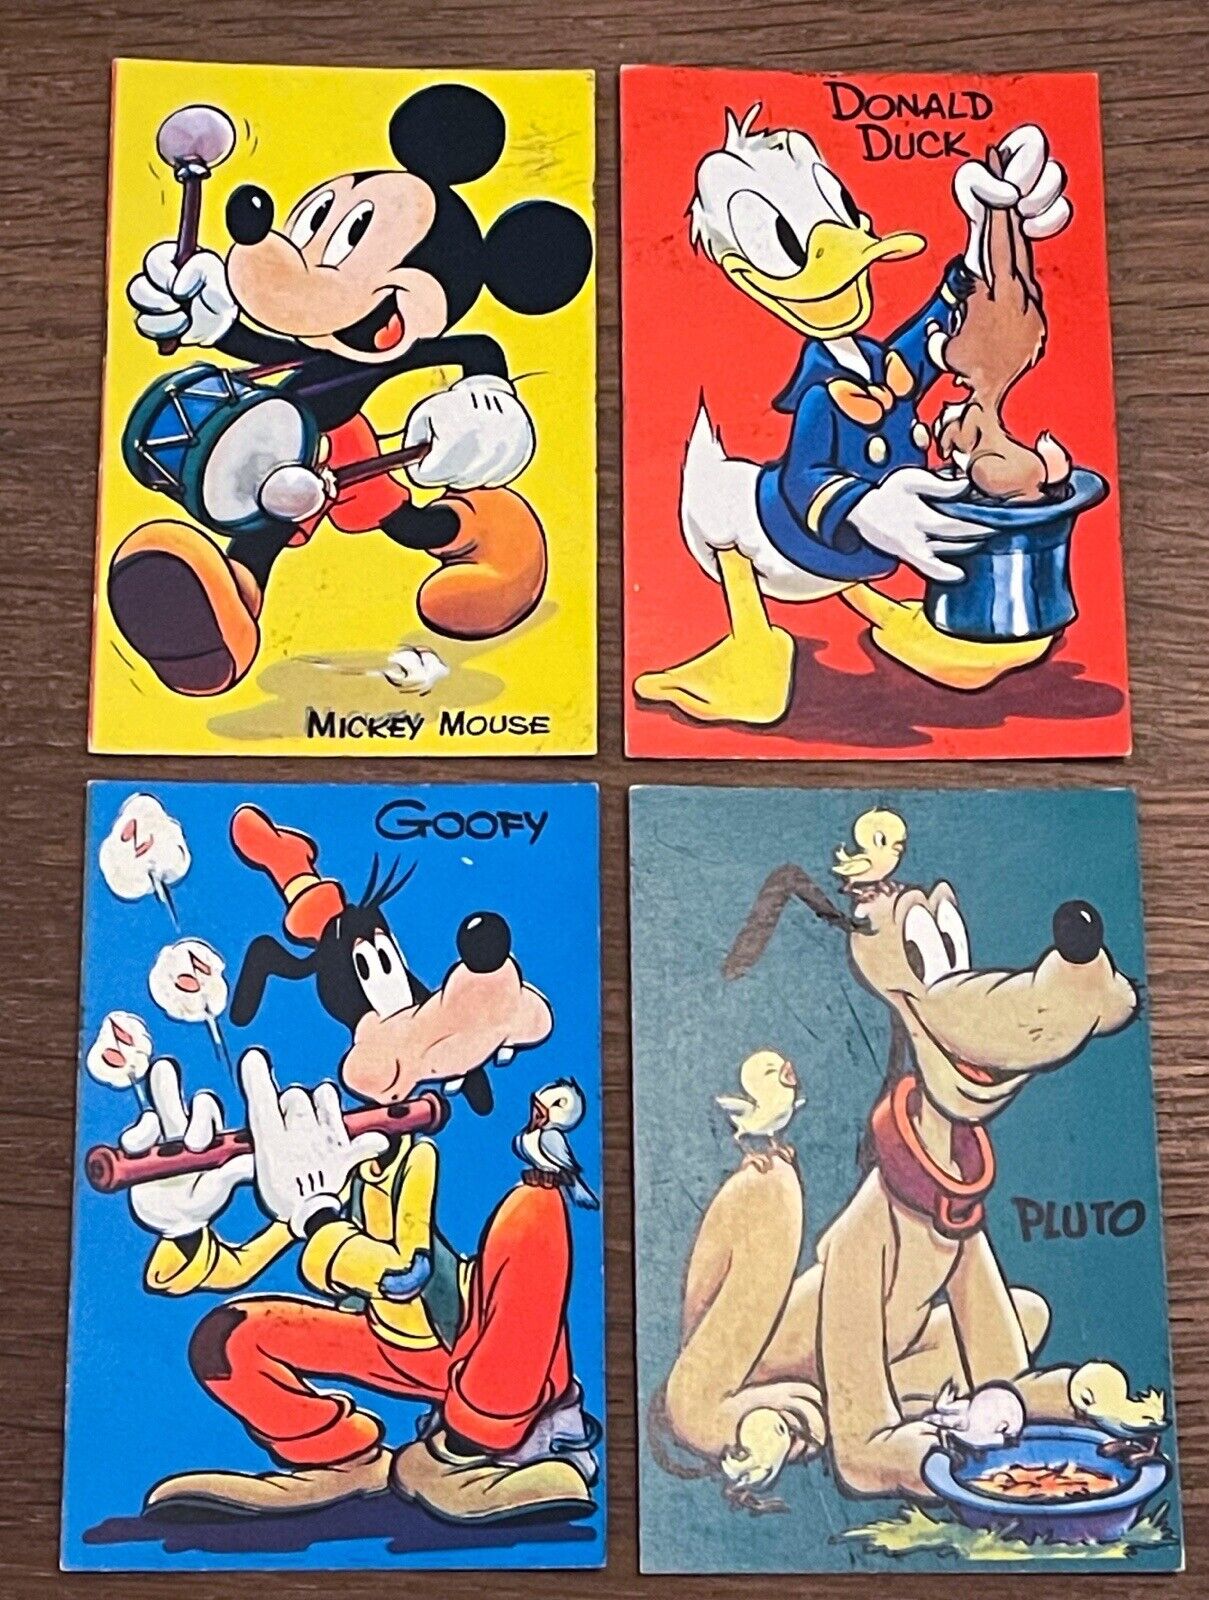 EXTREMELY RARE 1947 WU-PEE DISNEY CARD GAME MICKEY MOUSE CARDS DONALD/GOOFY